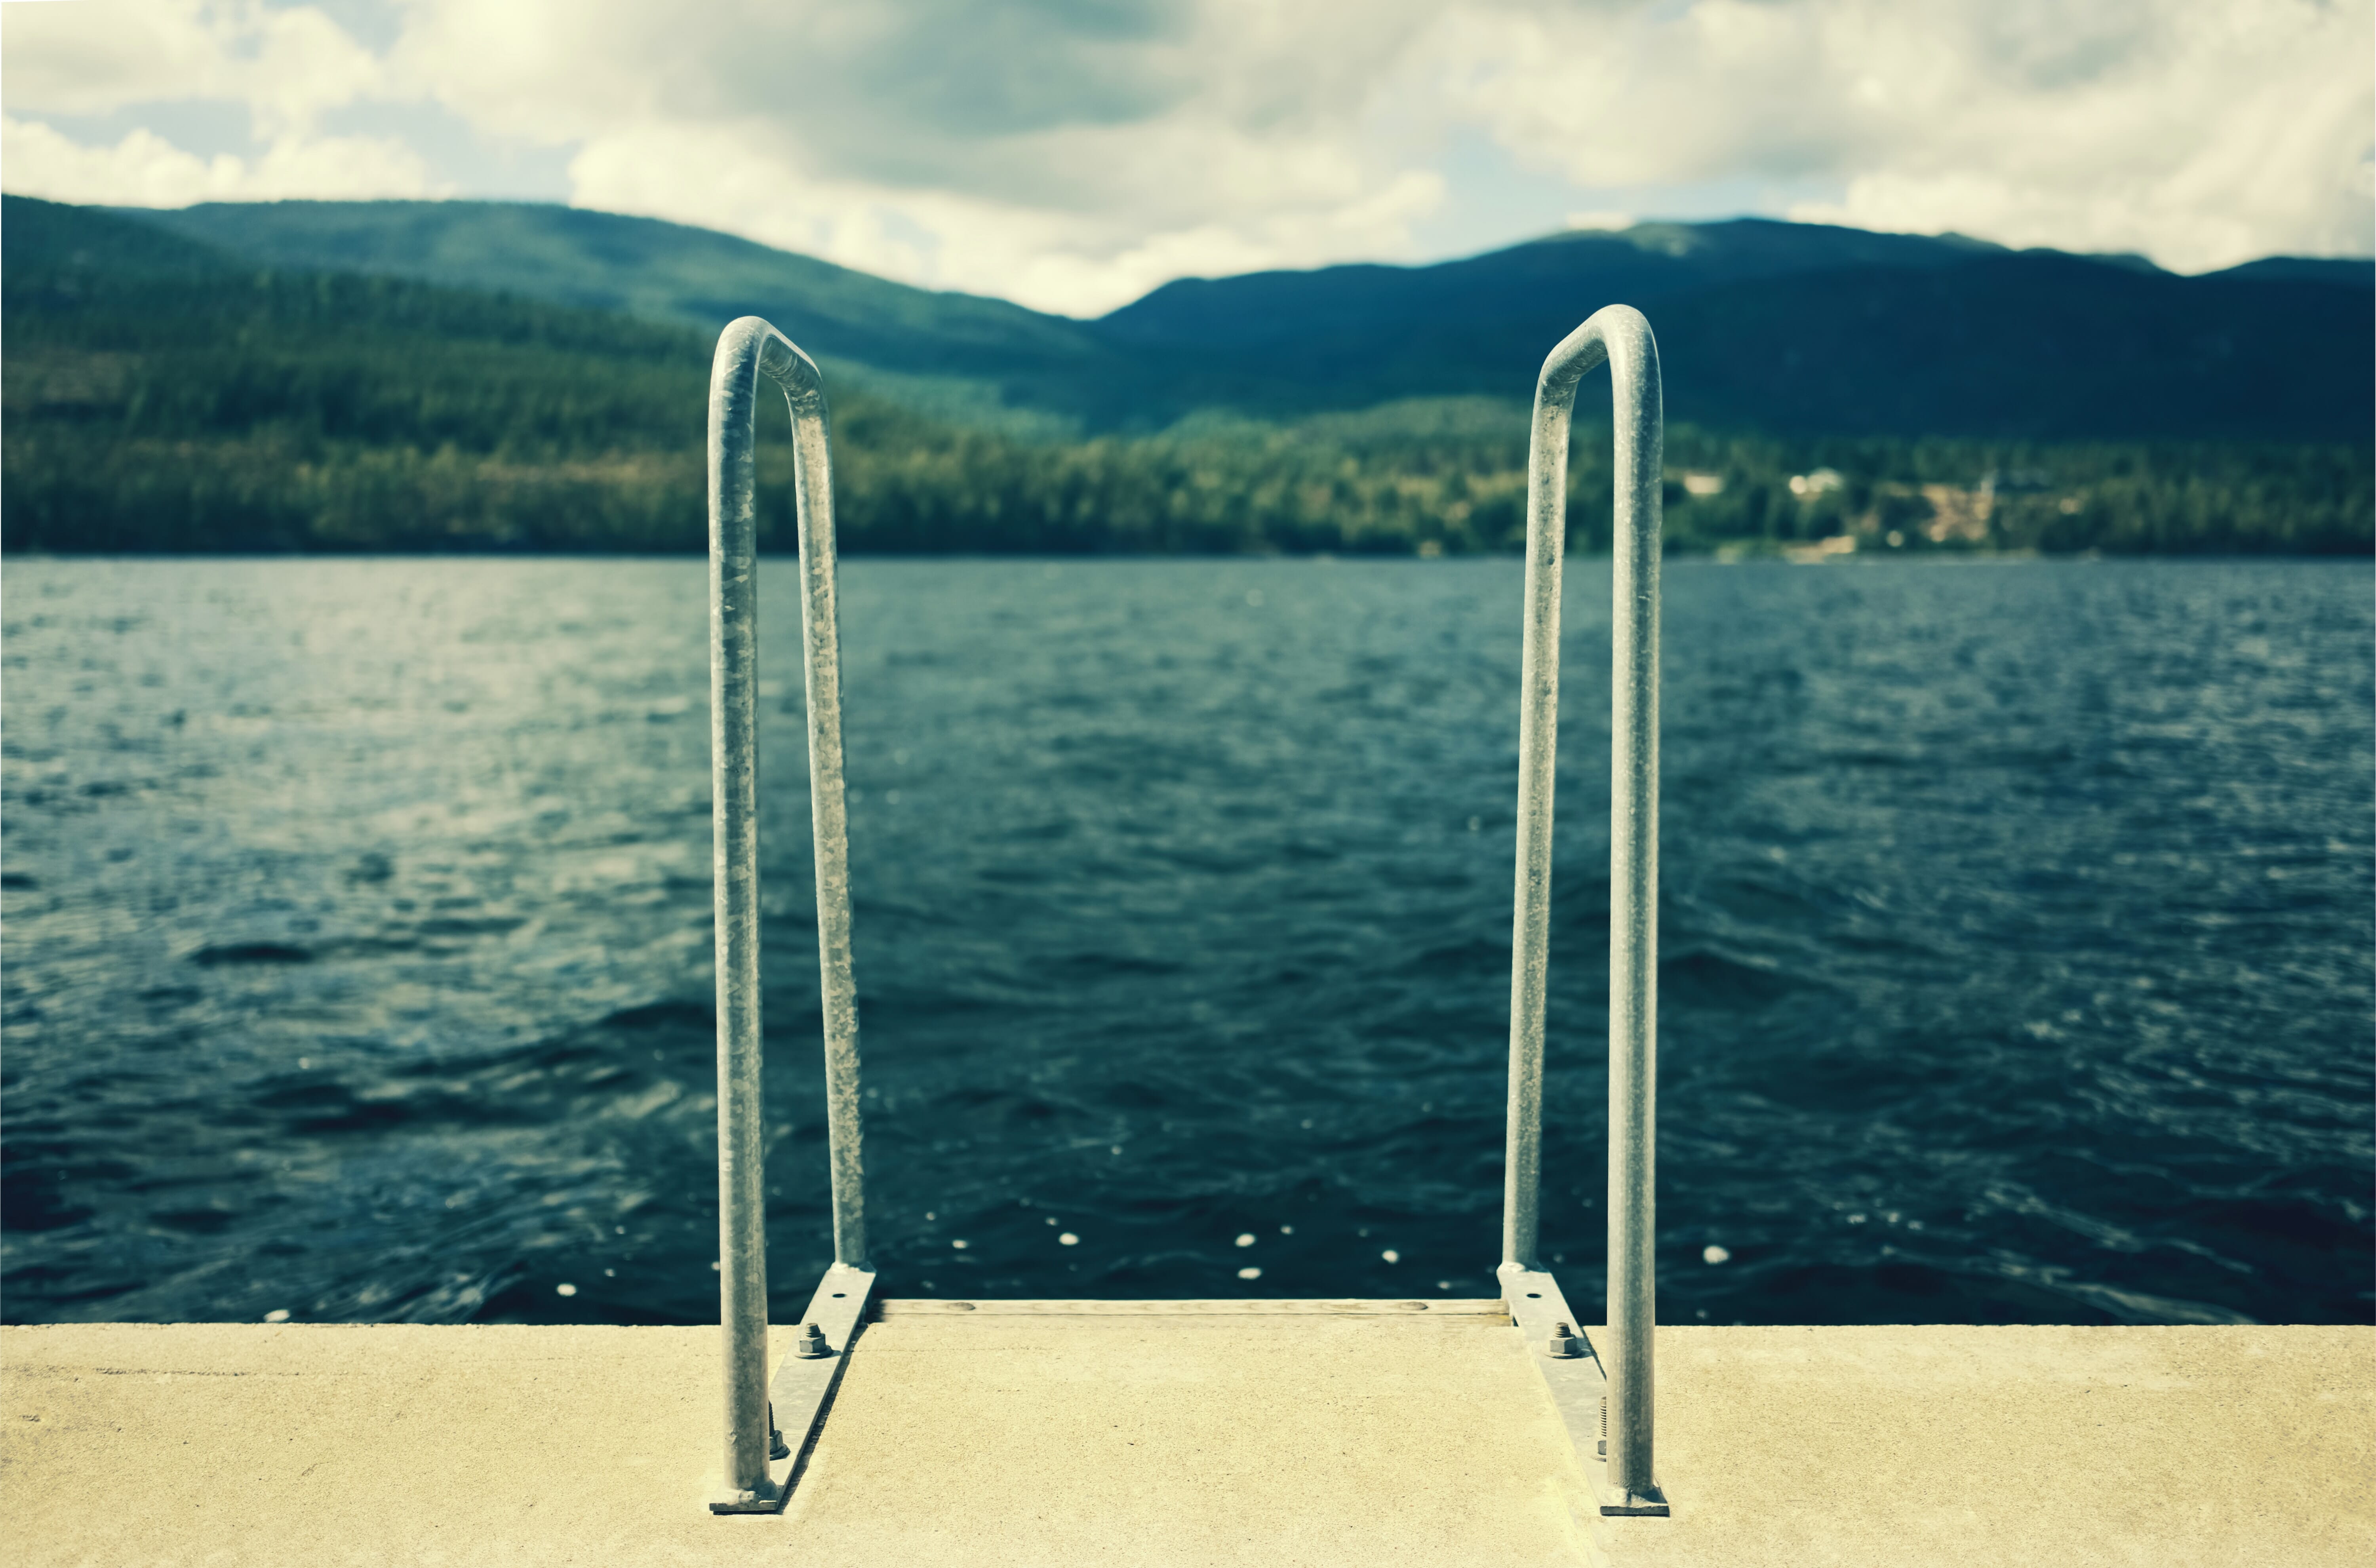 Metal railings sit atop a concrete structure near an ocean with mountains in the background.